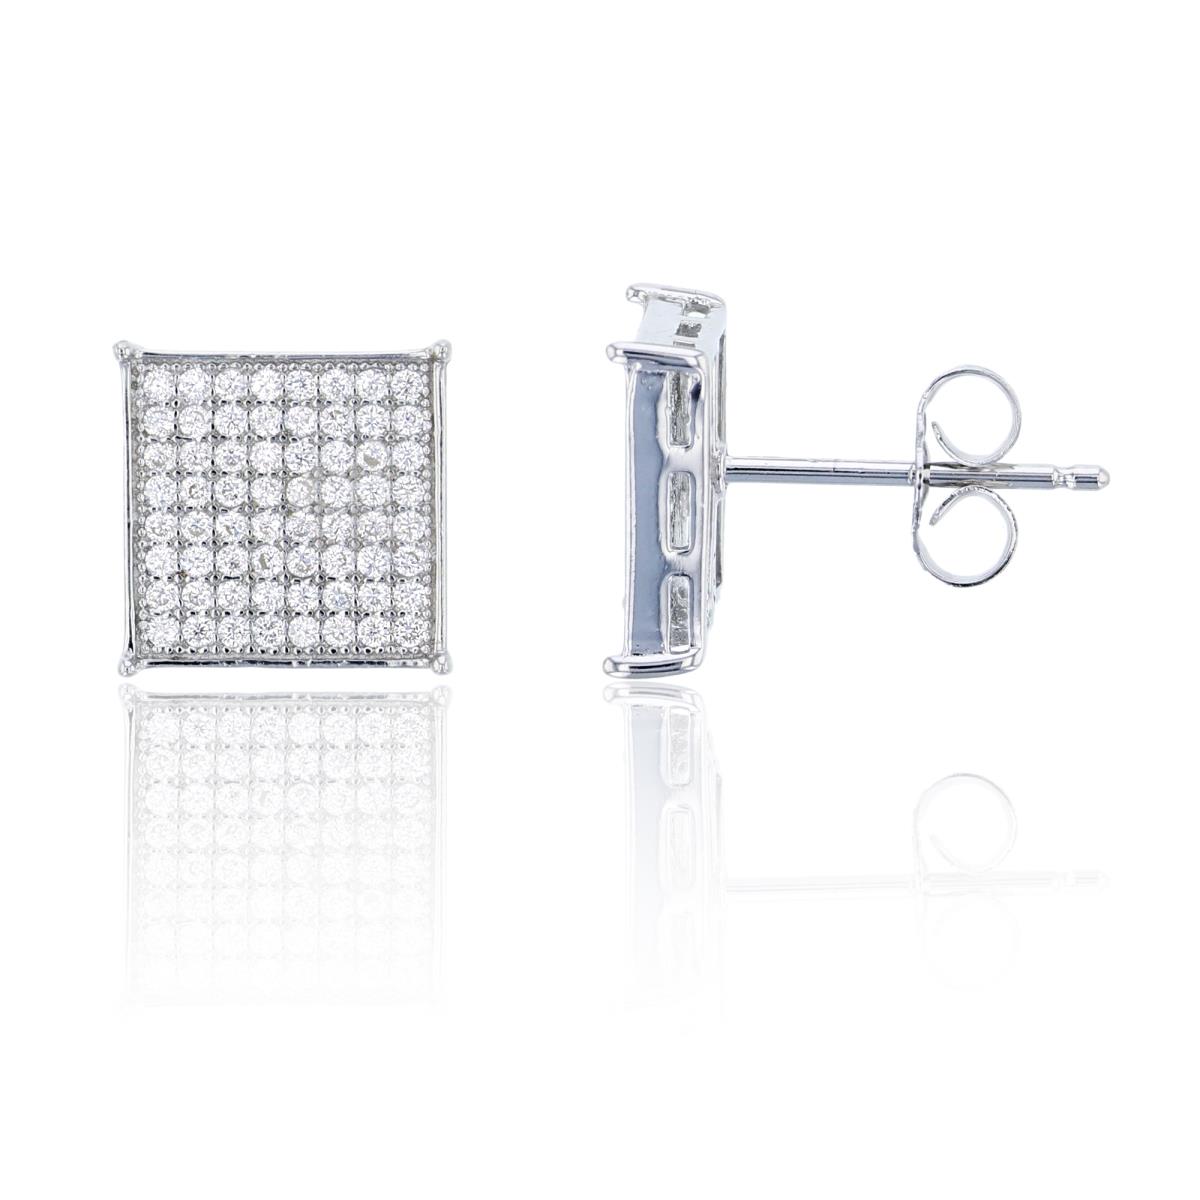 Sterling Silver 11x11mm Square Micropave Stud Earring